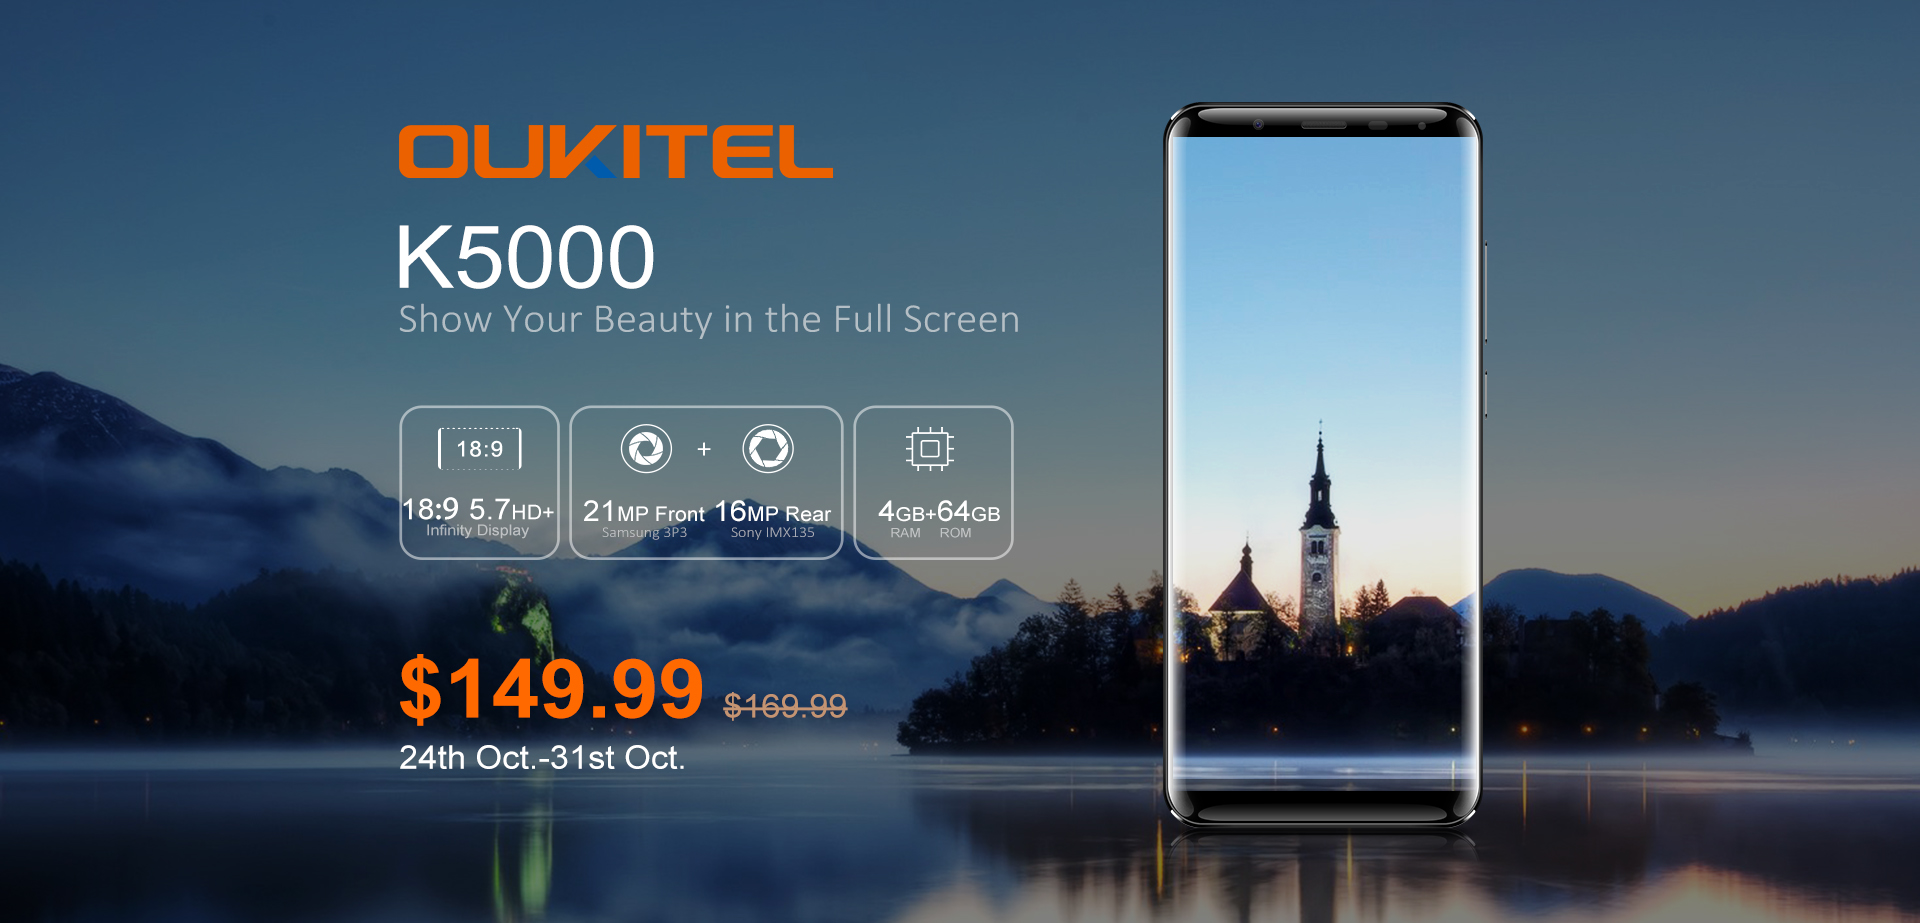 Smartphone OUKITEL K5000 available for pre-order